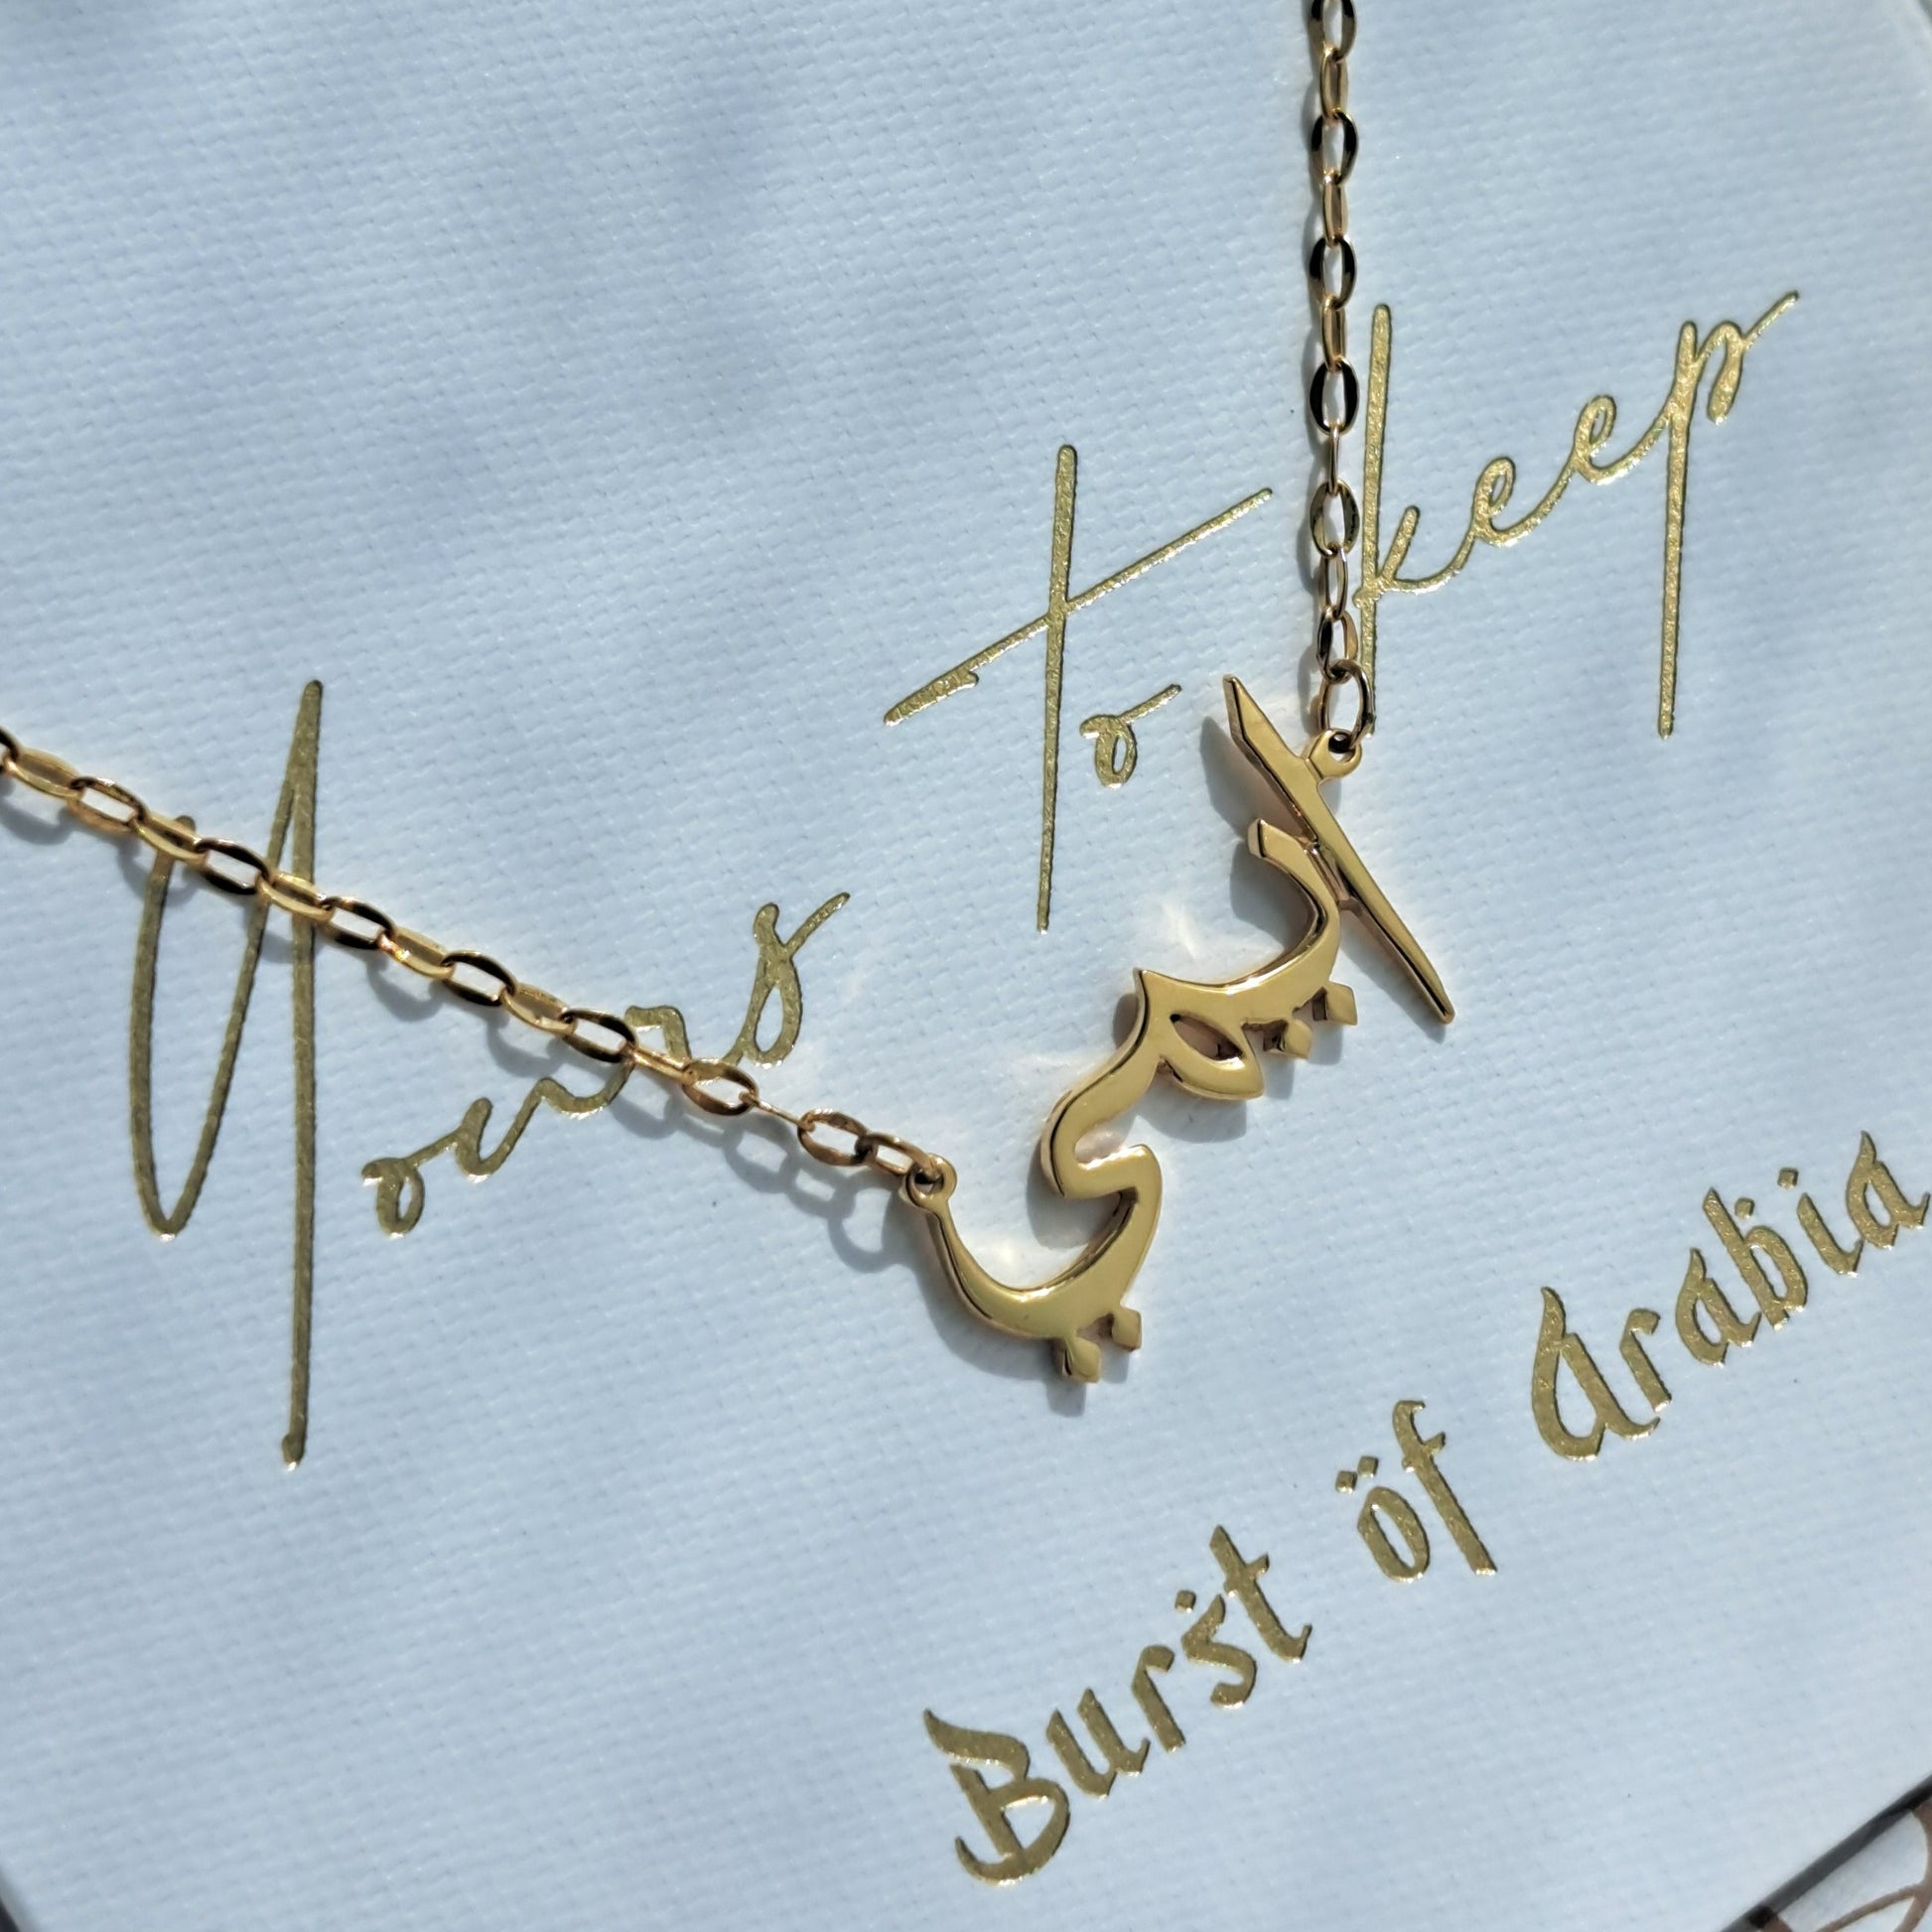 Arabic name necklace, designed in Dubai with 18 carat gold, available in three colors: yellow gold, white gold, rose gold.